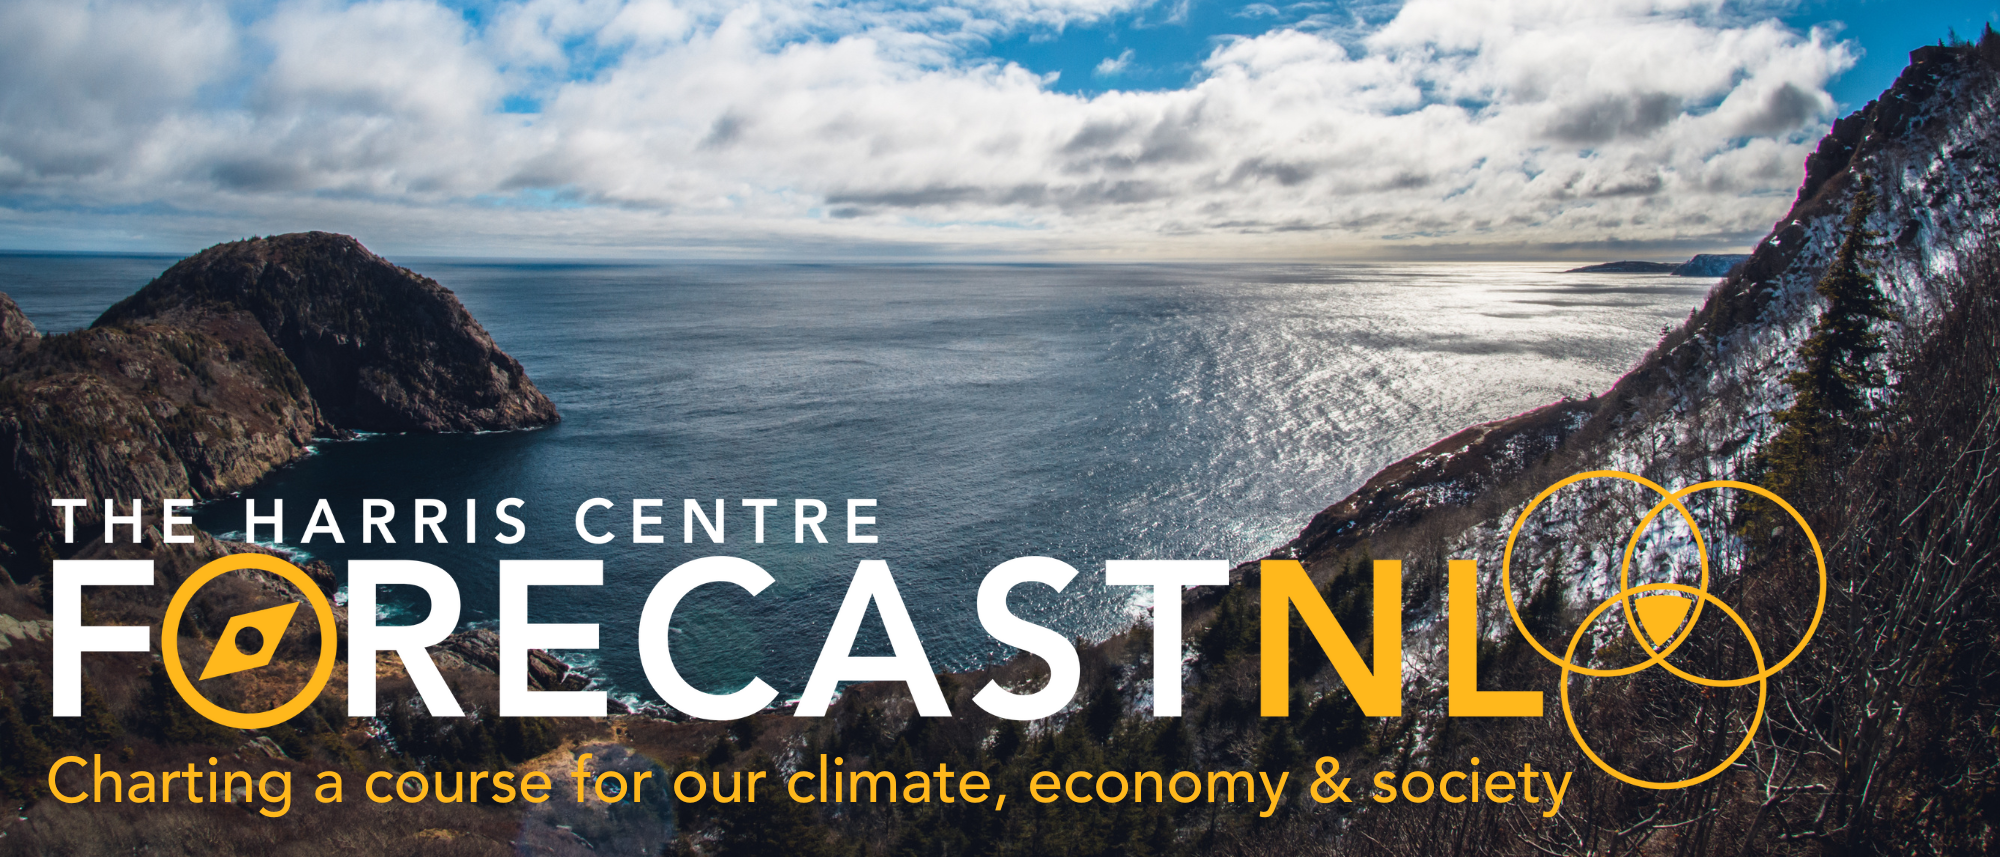 ForecastNL logo: Charting a course for our climate, economy and society